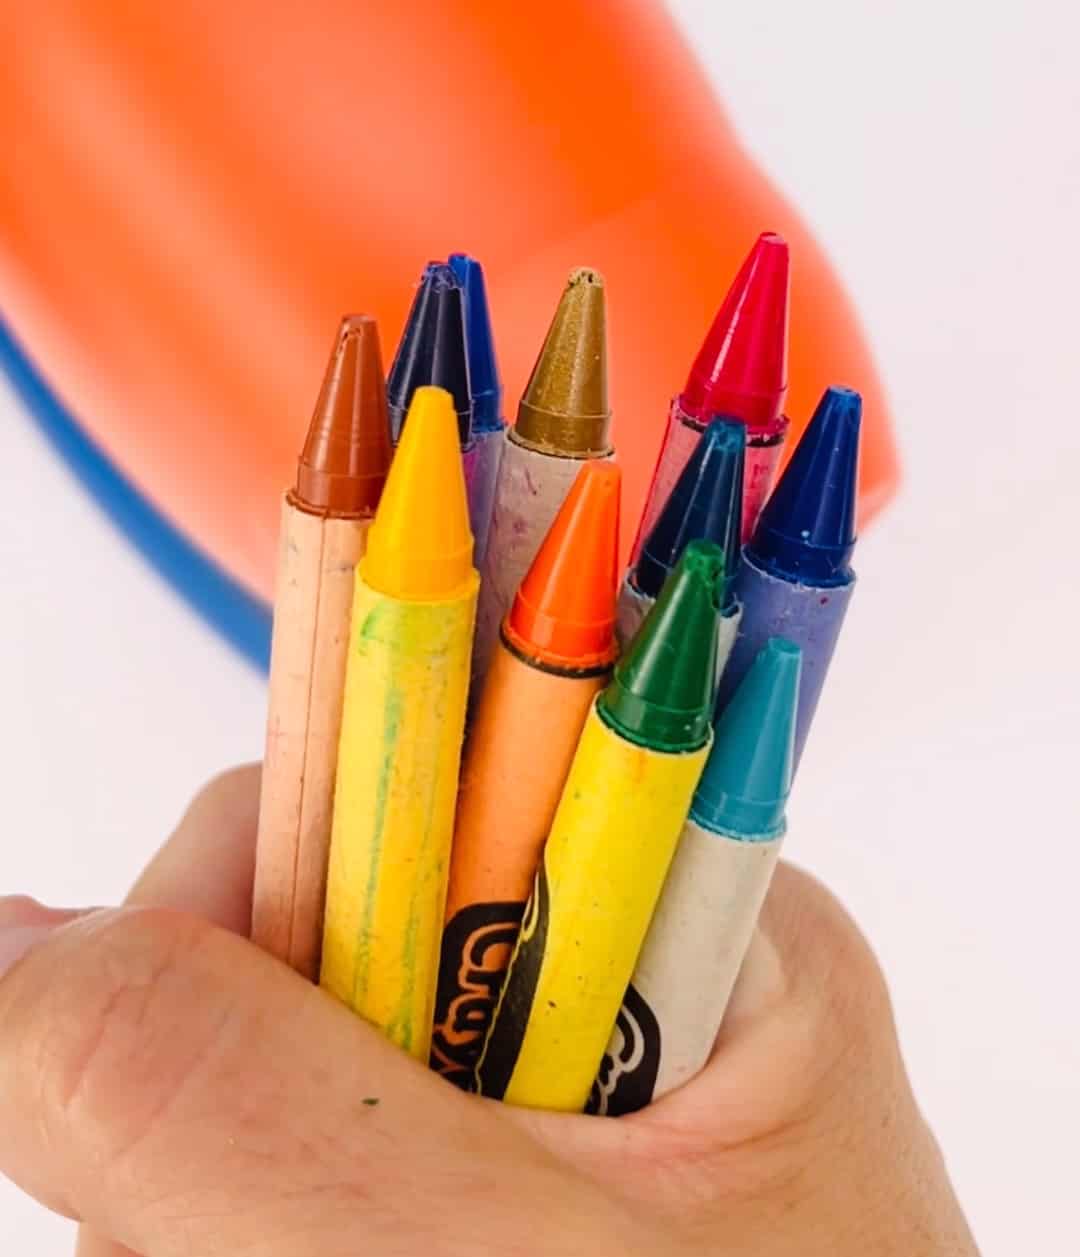 Close-up detail of sharp colourful pencil crayons laid side by